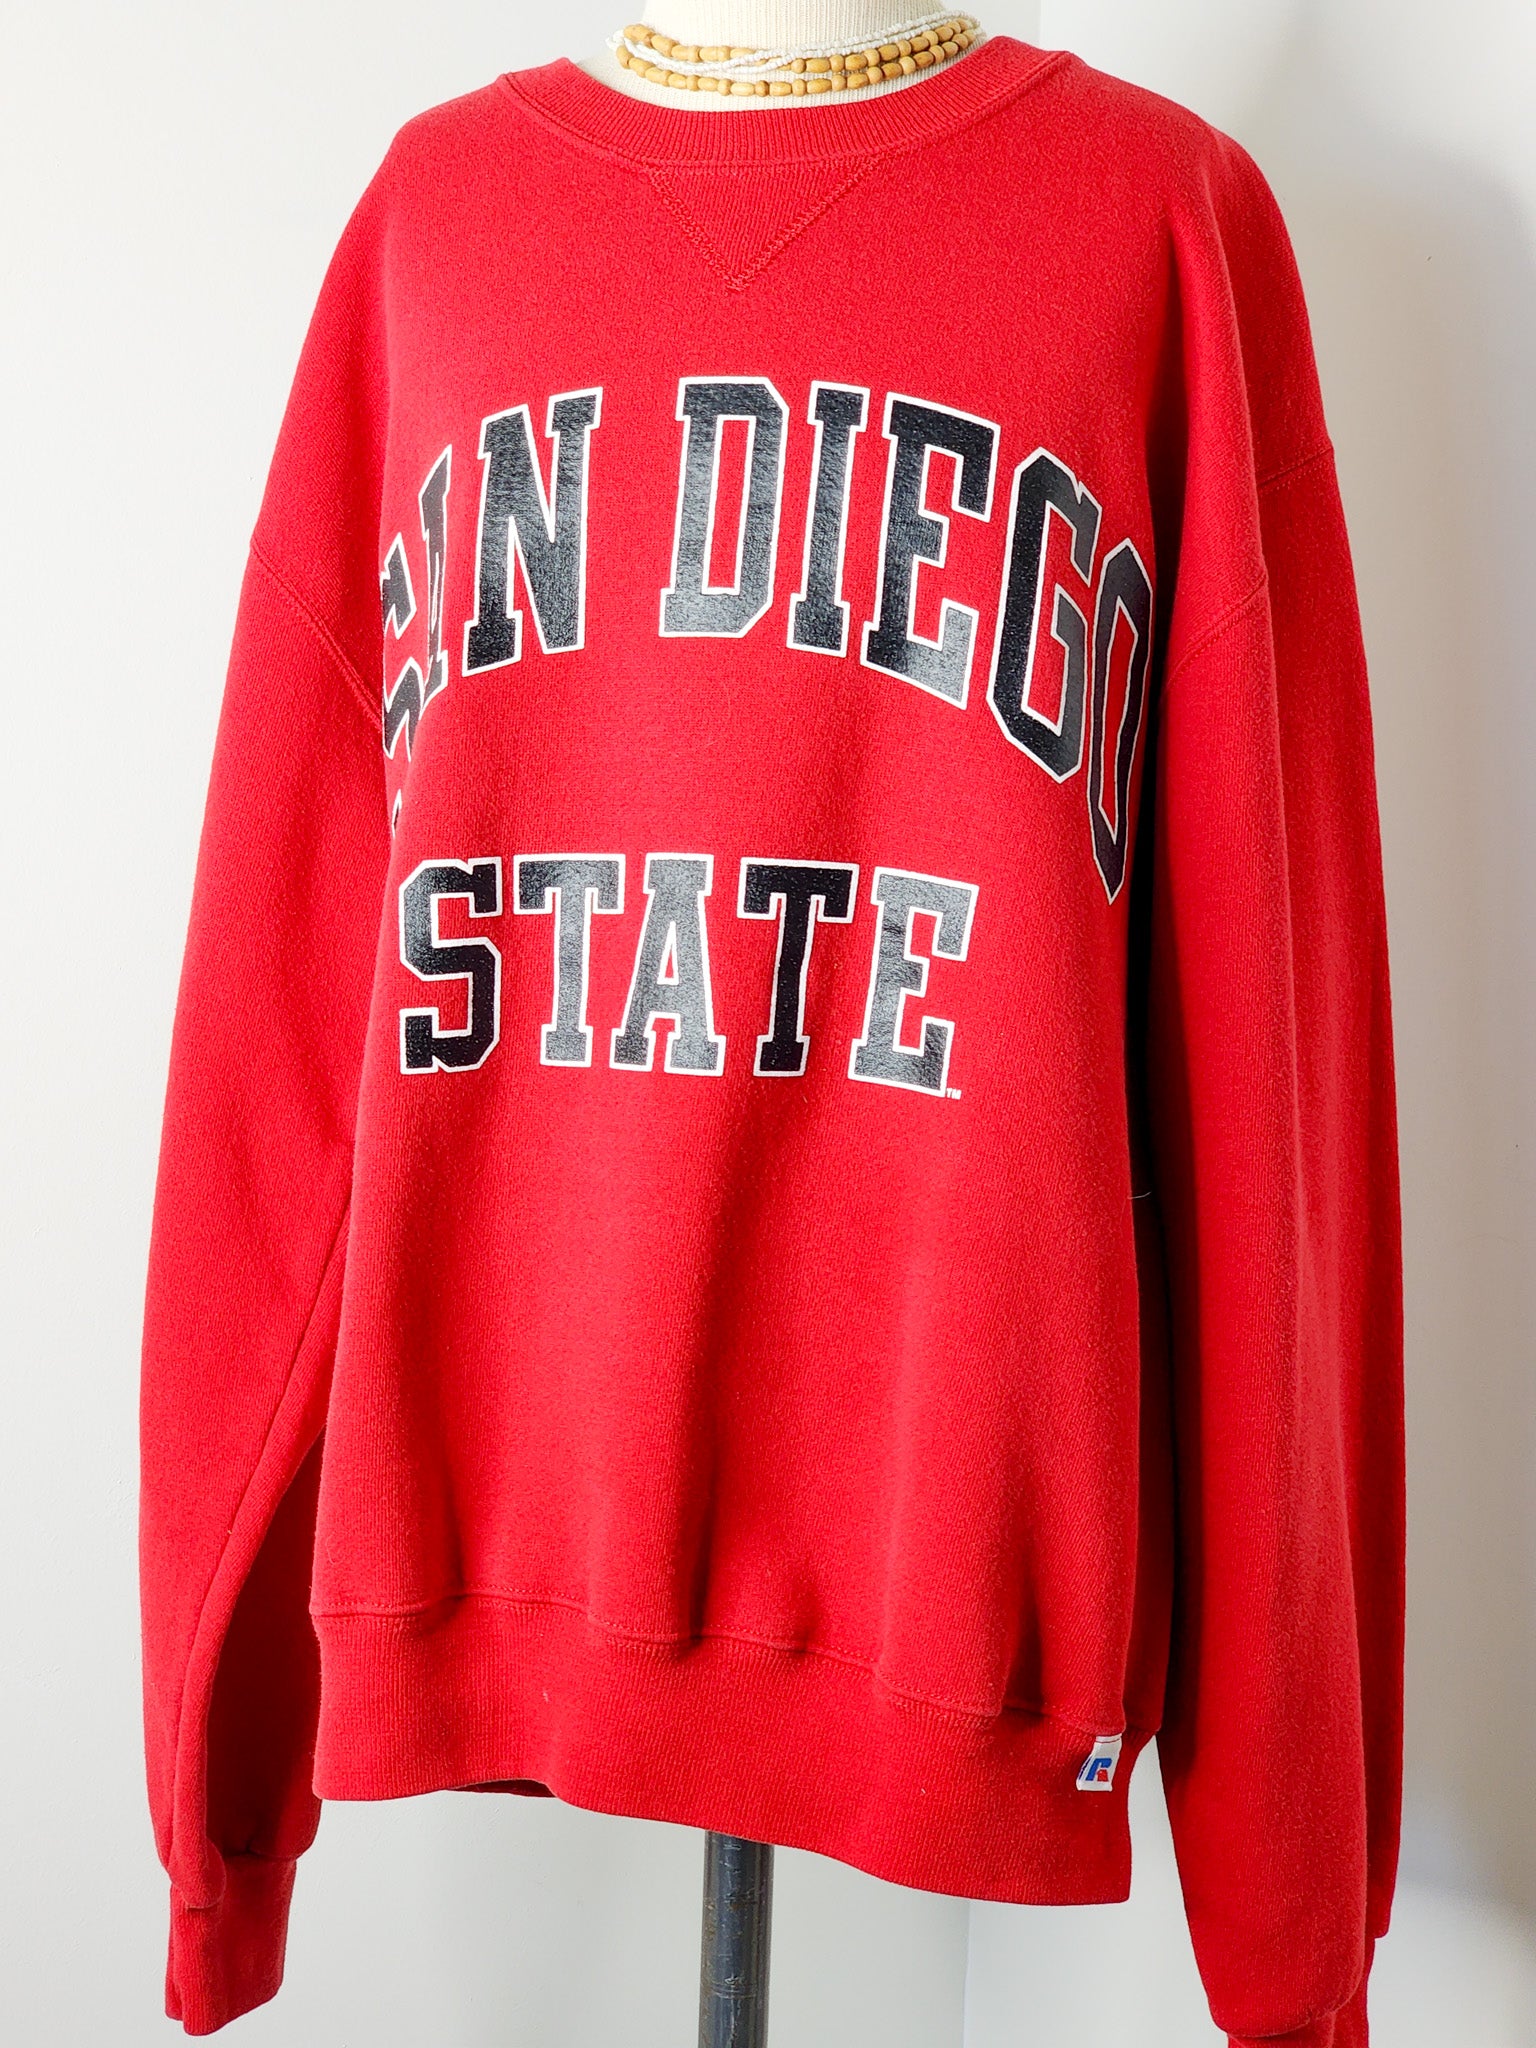 SDSU Russell Athletic College Sweater - Reclaimed Mt. Goods